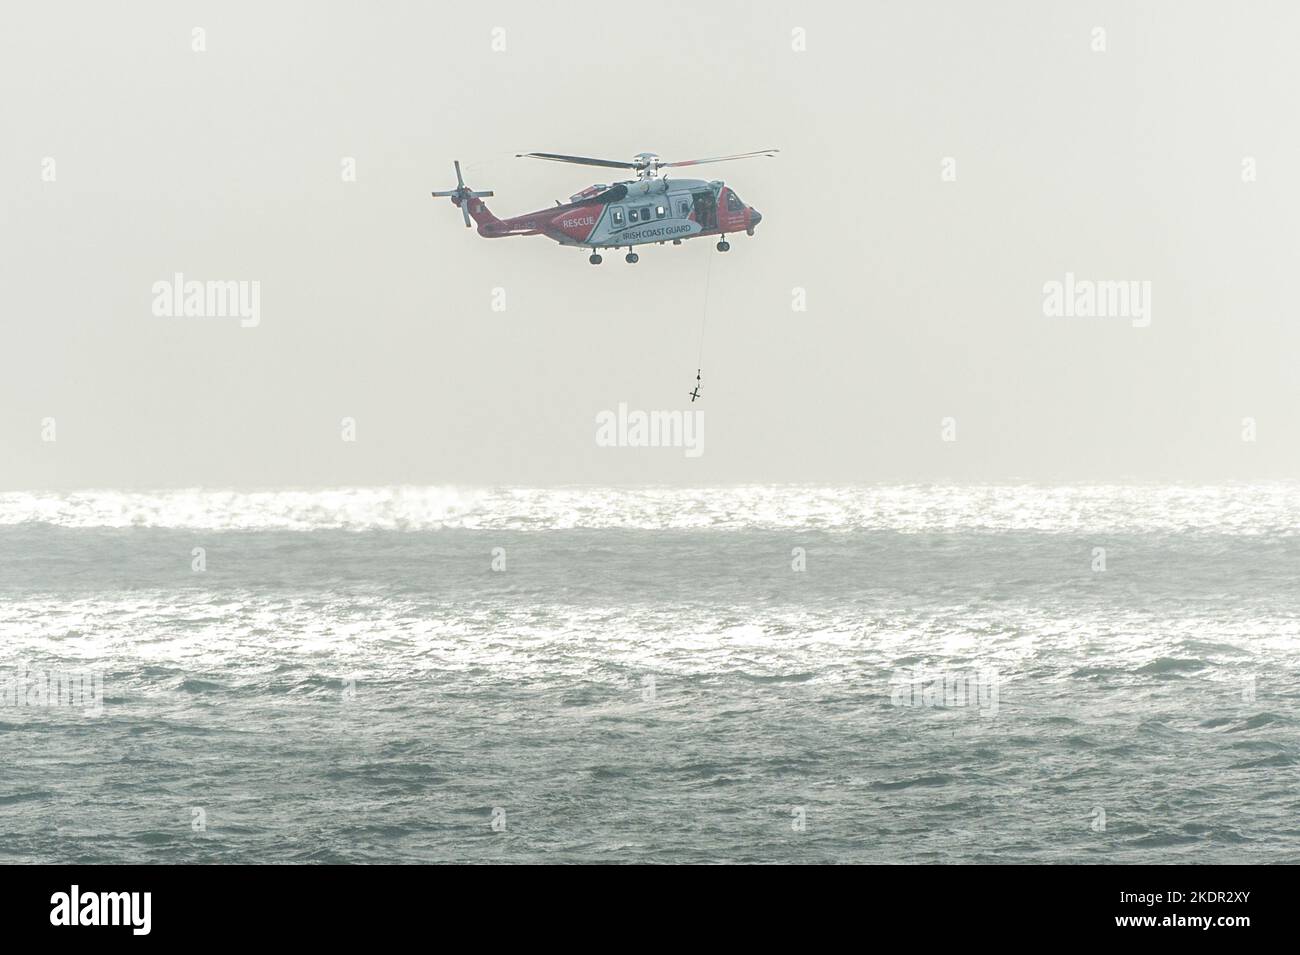 Tramore, Co. Waterford, Ireland. 8th Nov, 2022. The Irish Coastguard helicopter, Rescue 115, conducted a winching exercise in Tramore Bay this morning. The helicopter hovered for around 20 minutes during the exercise before flying back to its base at Waterford Airport. Credit: AG News/Alamy Live News Stock Photo